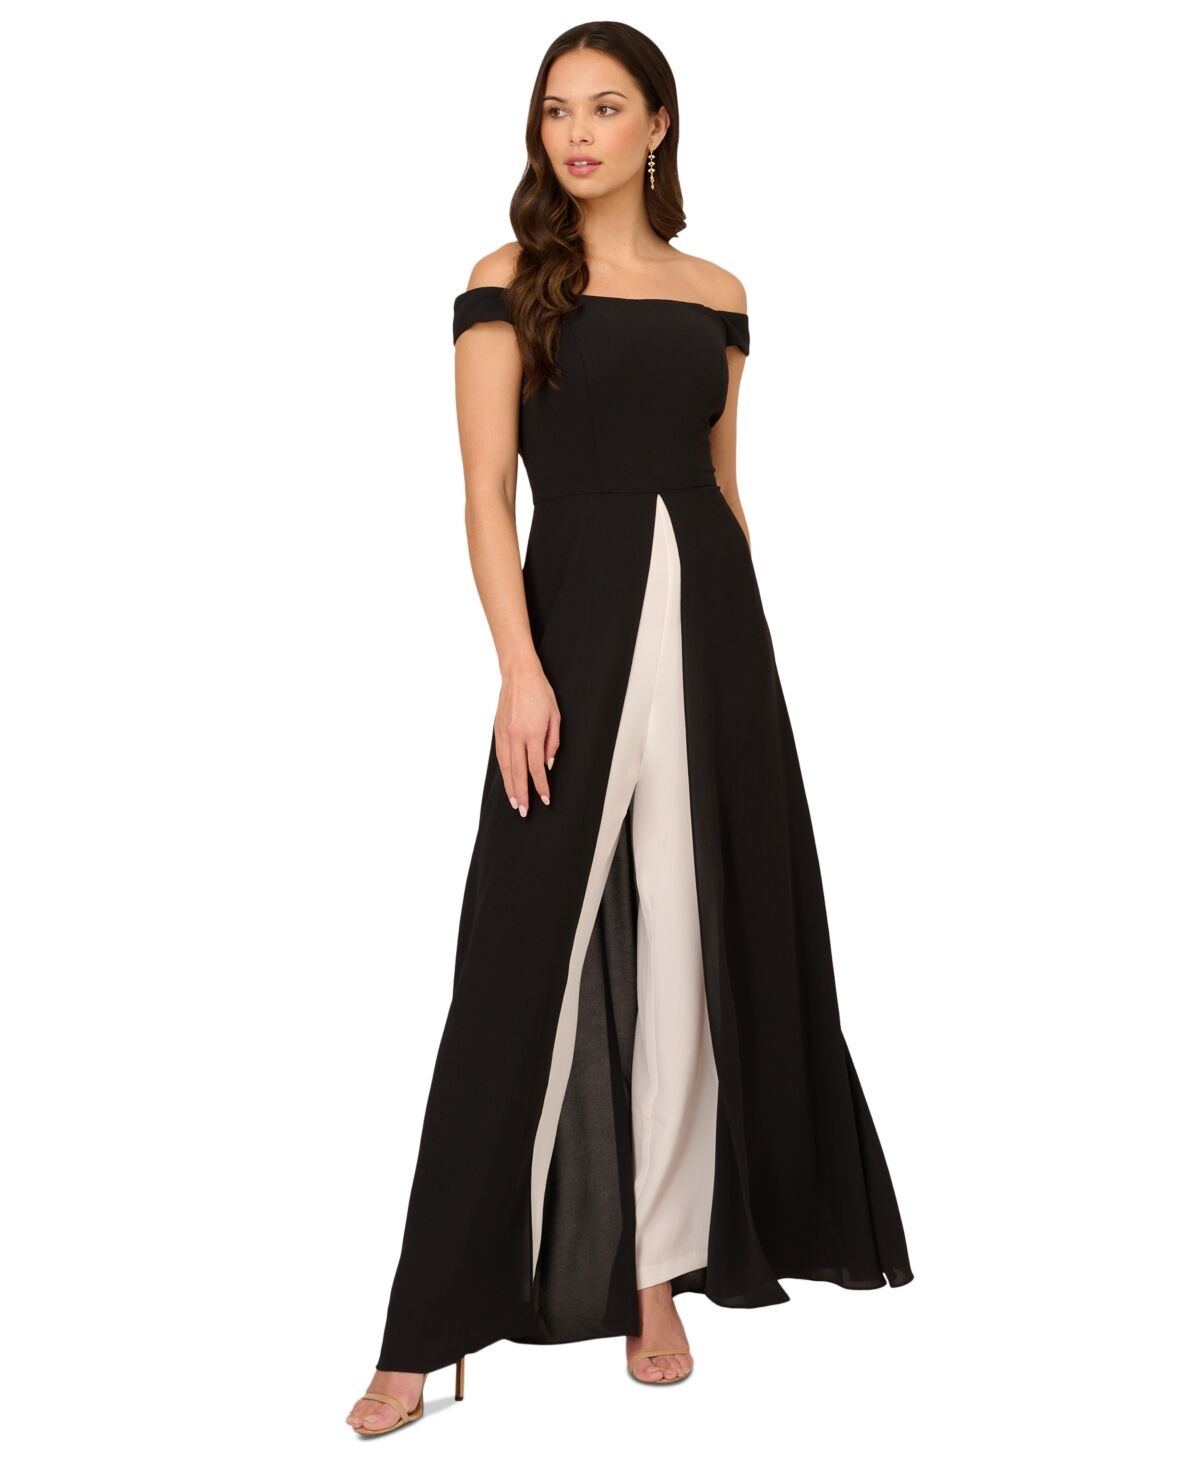 Adrianna Papell Women's Off-The-Shoulder Overlay Jumpsuit - Black/Ivory